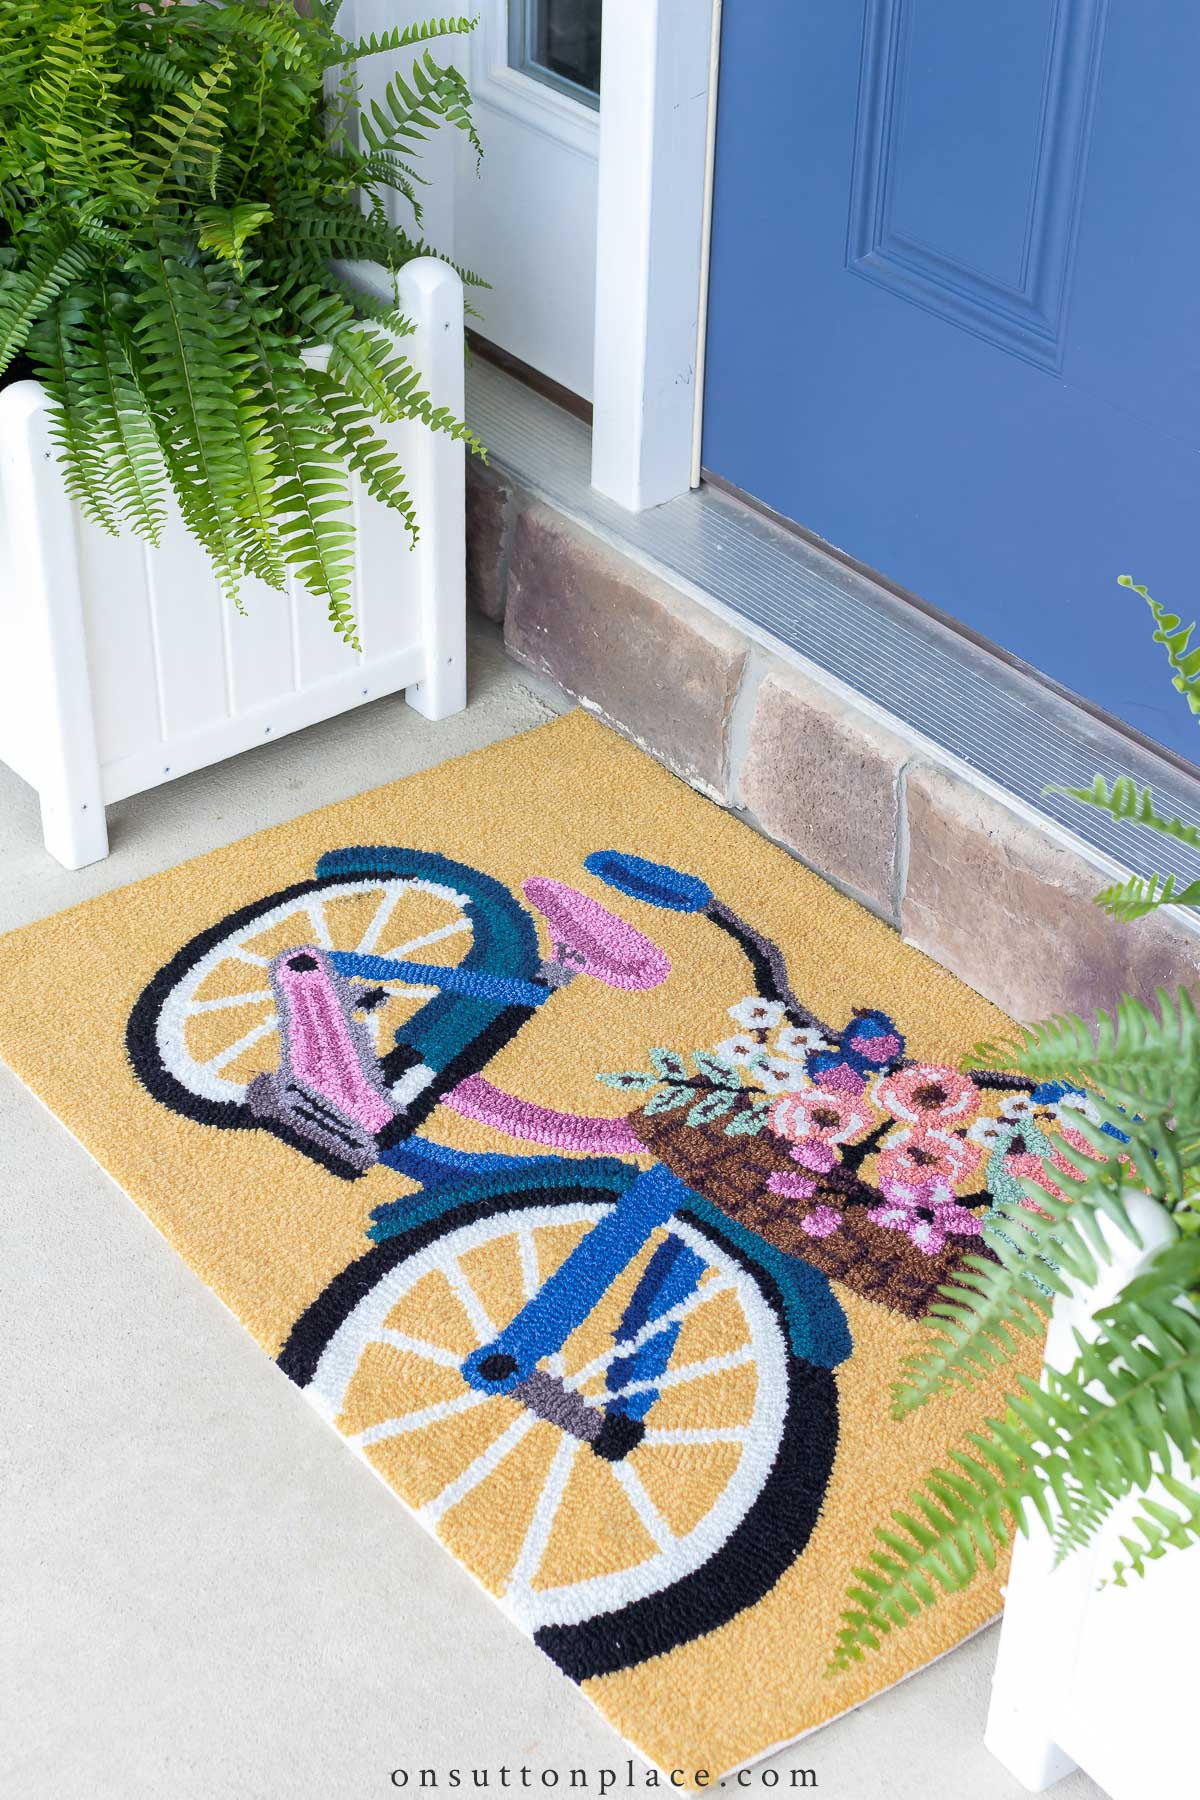 https://www.onsuttonplace.com/wp-content/uploads/2022/05/easy-spring-porch-refresh-cute-bicycle-doormat1.jpg